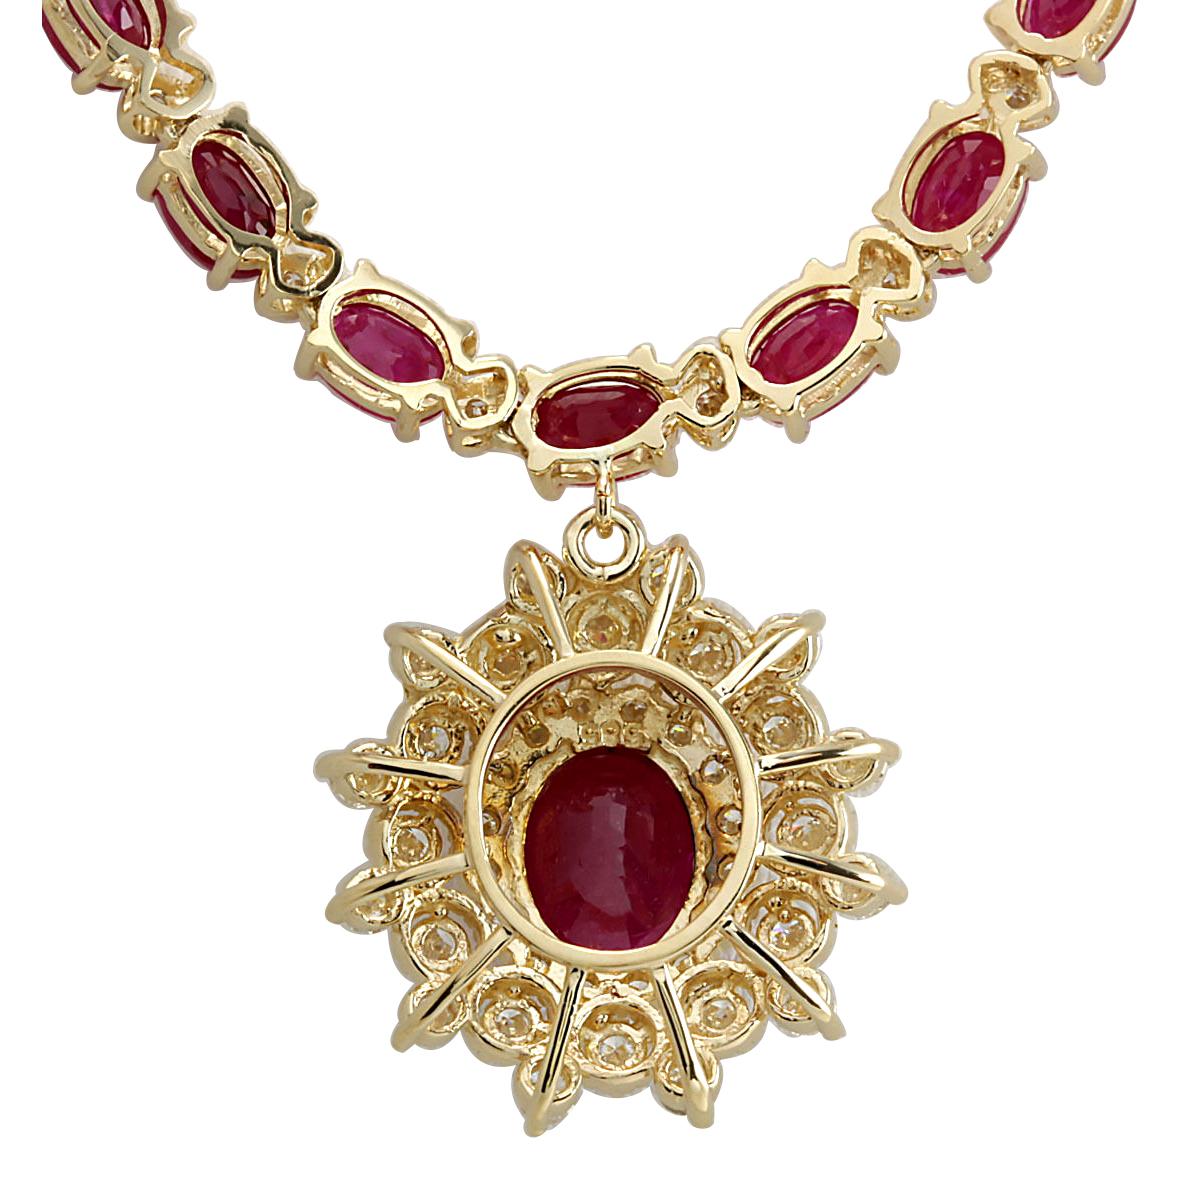 Adorn yourself with opulence by wearing our exquisite 40.45 Carat Natural Ruby 14 Karat Yellow Gold Diamond Necklace. This luxurious piece is crafted from stamped 14K yellow gold, boasting a total necklace weight of 24.0 grams and a length of 17